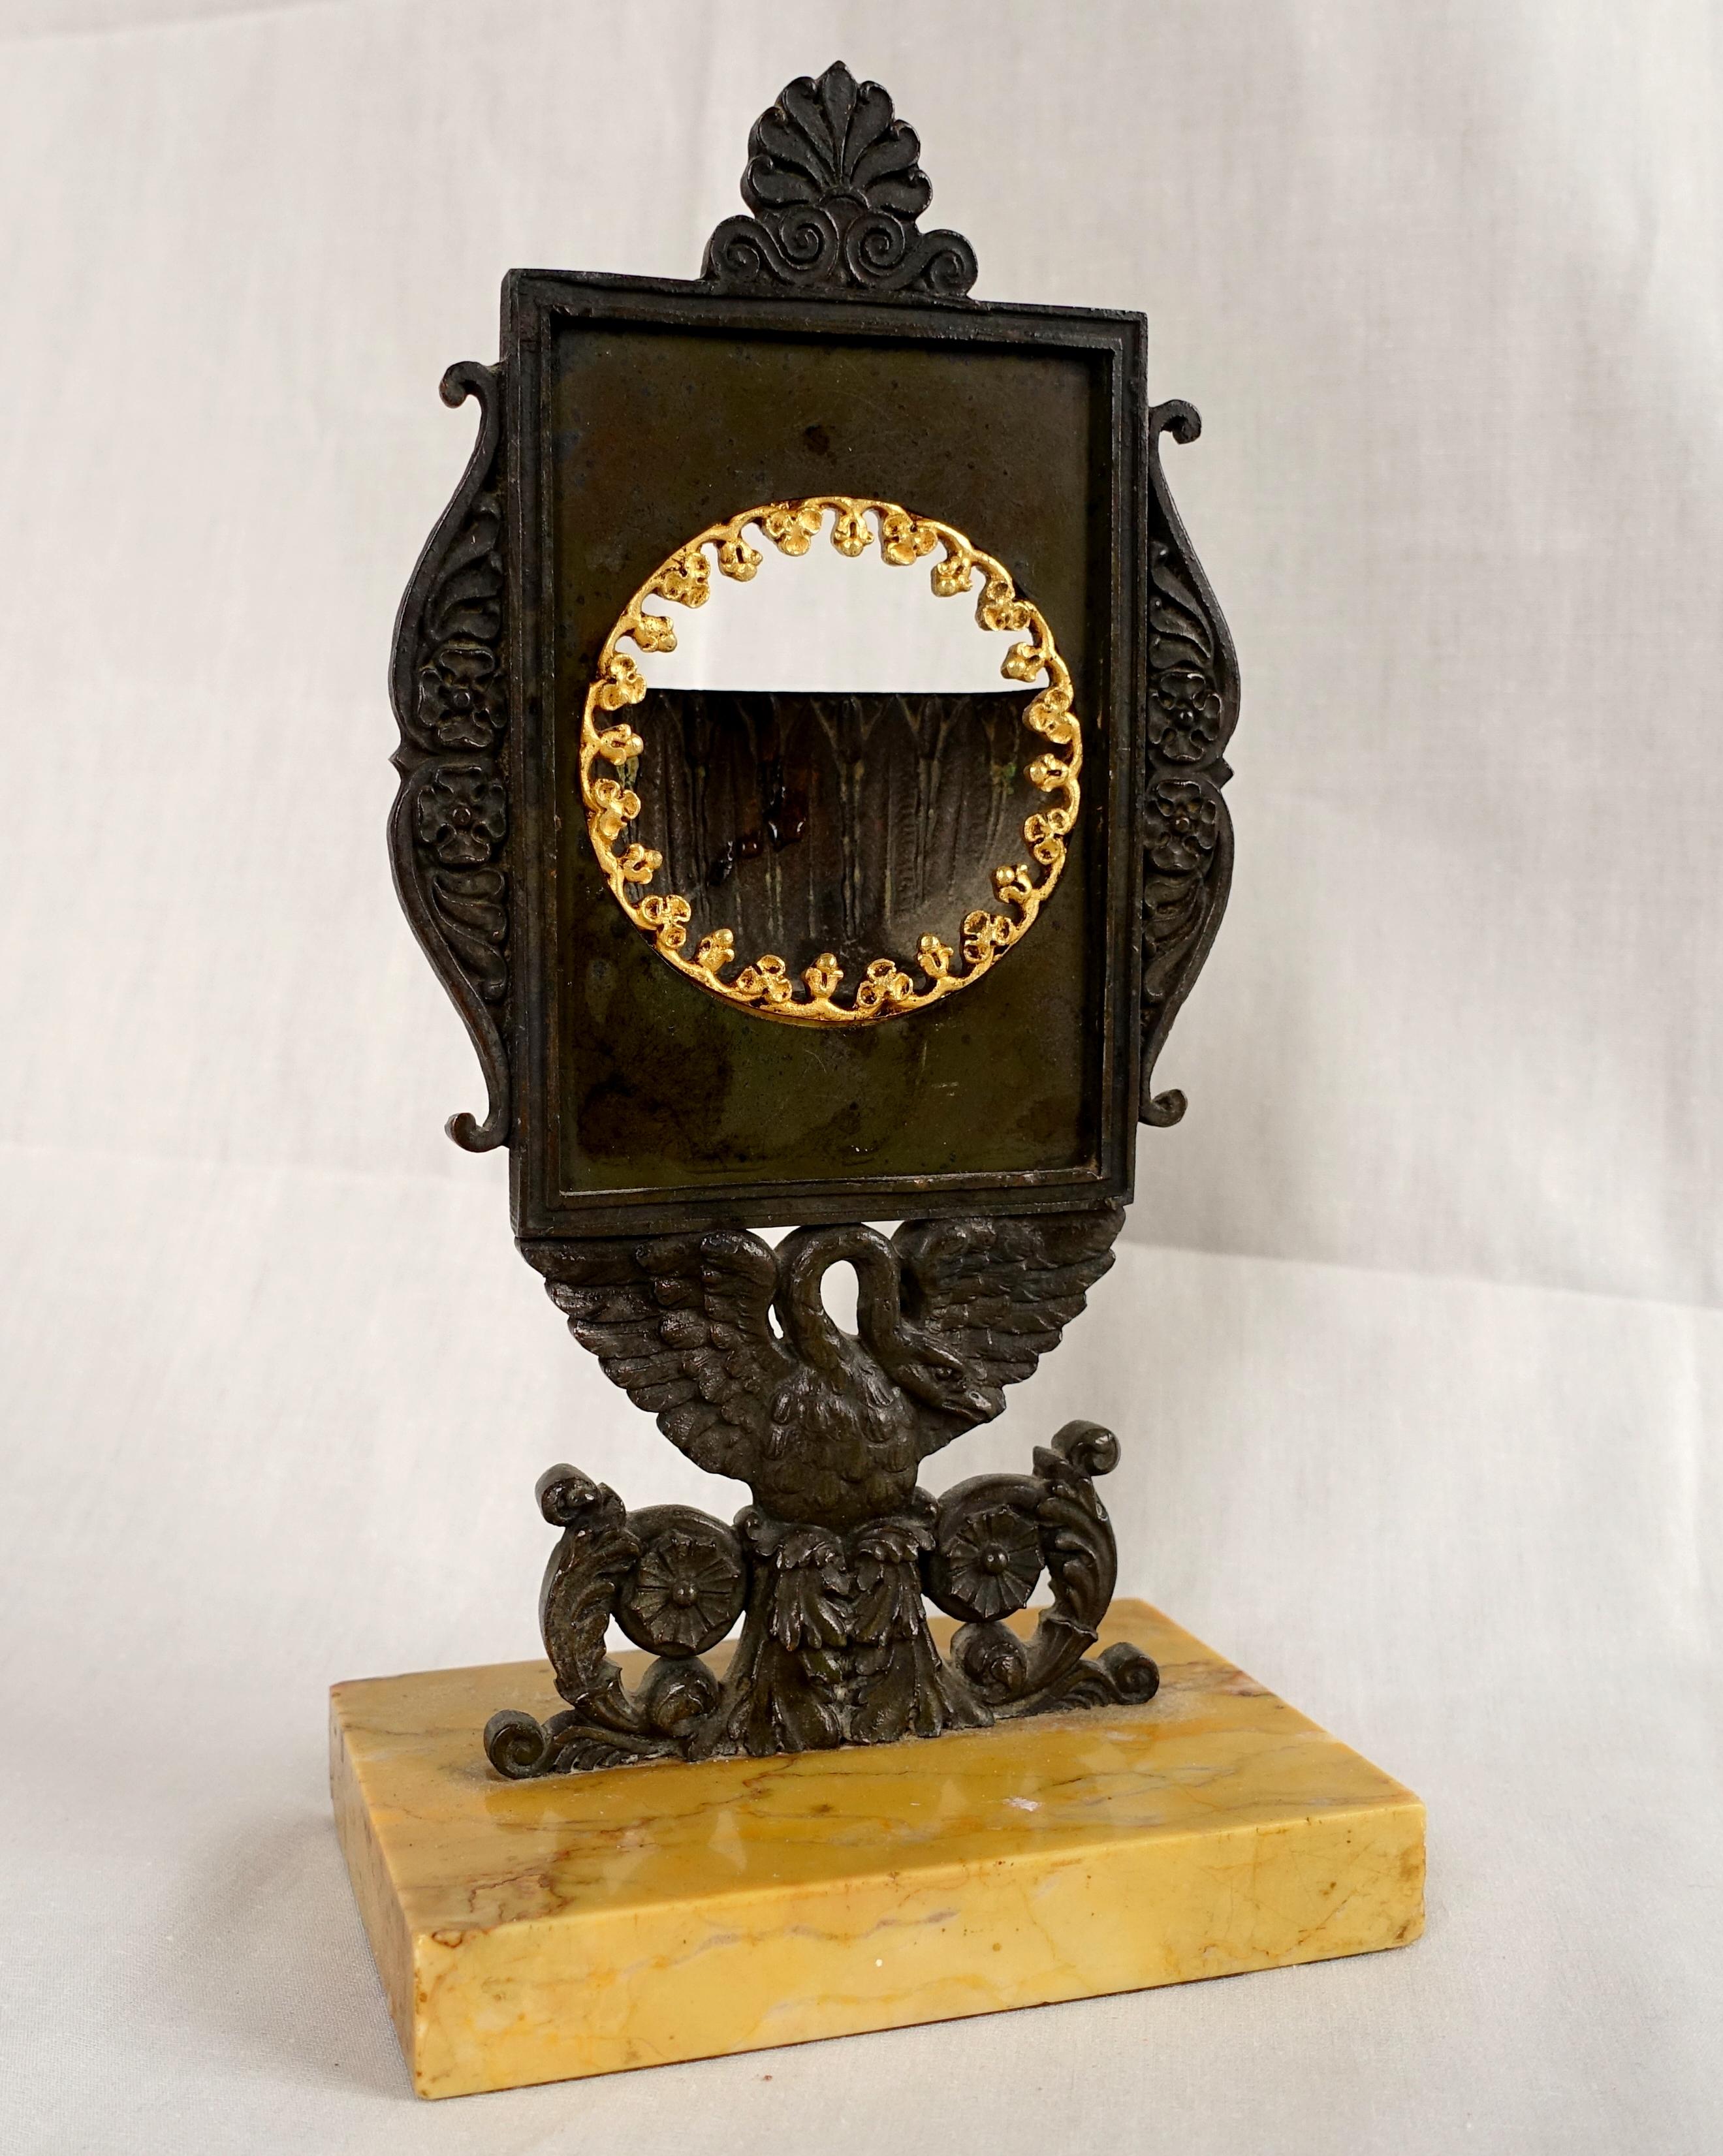 Antique French Empire watch holder, early 19th century circa 1820.
The watch holder allows conversion of an open faced pocket watch in to a desk clock or table clock.
Beautiful, rare model featuring a patinated bronze shield held by a swan standing